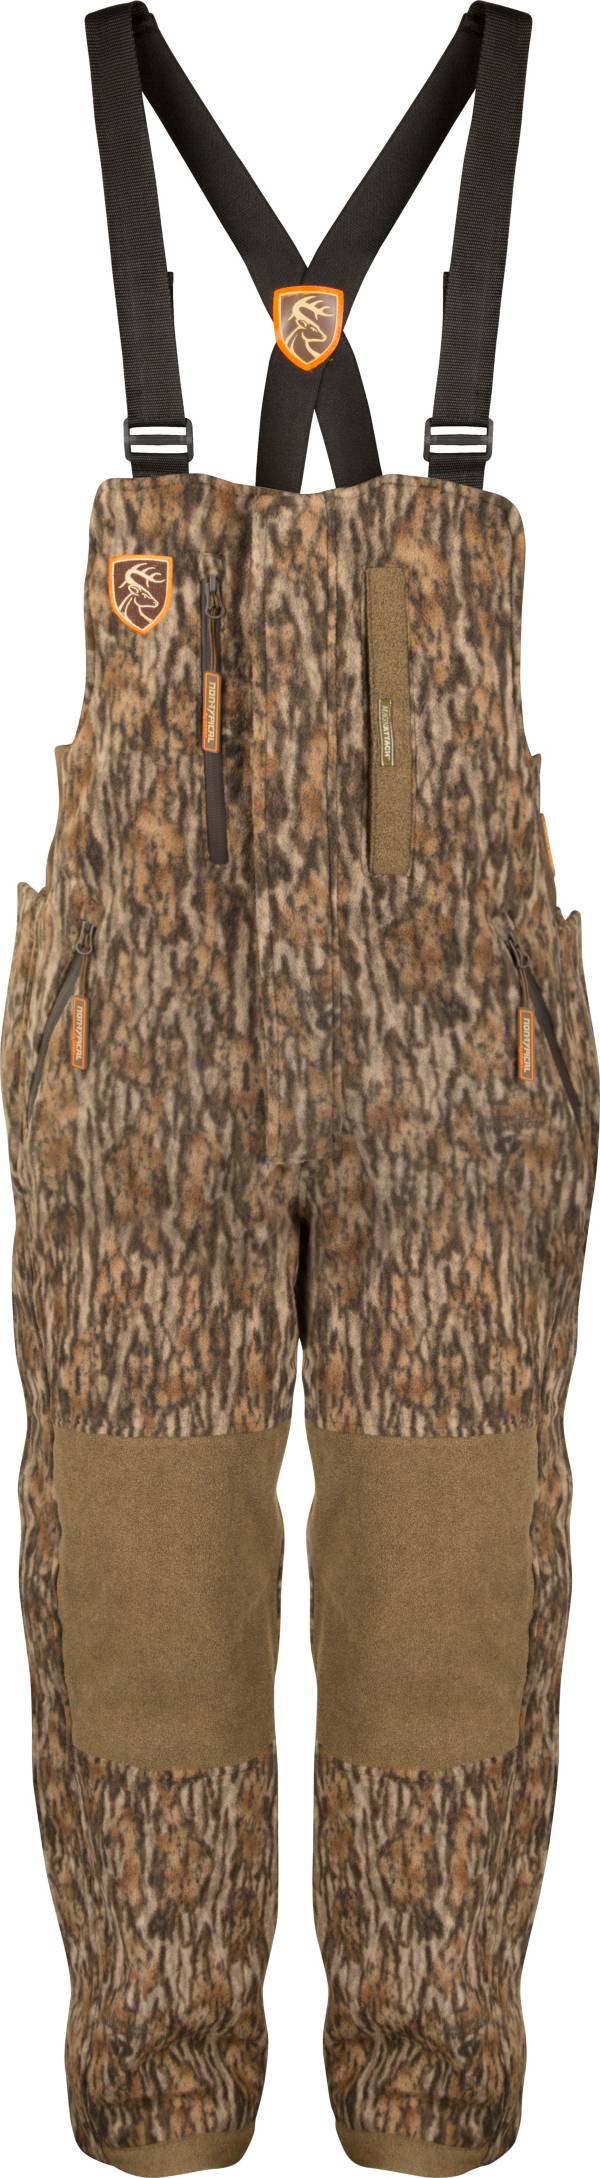 Drake Waterfowl Men's Non-Typical HydroHush Midweight Hunting Bibs with Agion Active XL product image